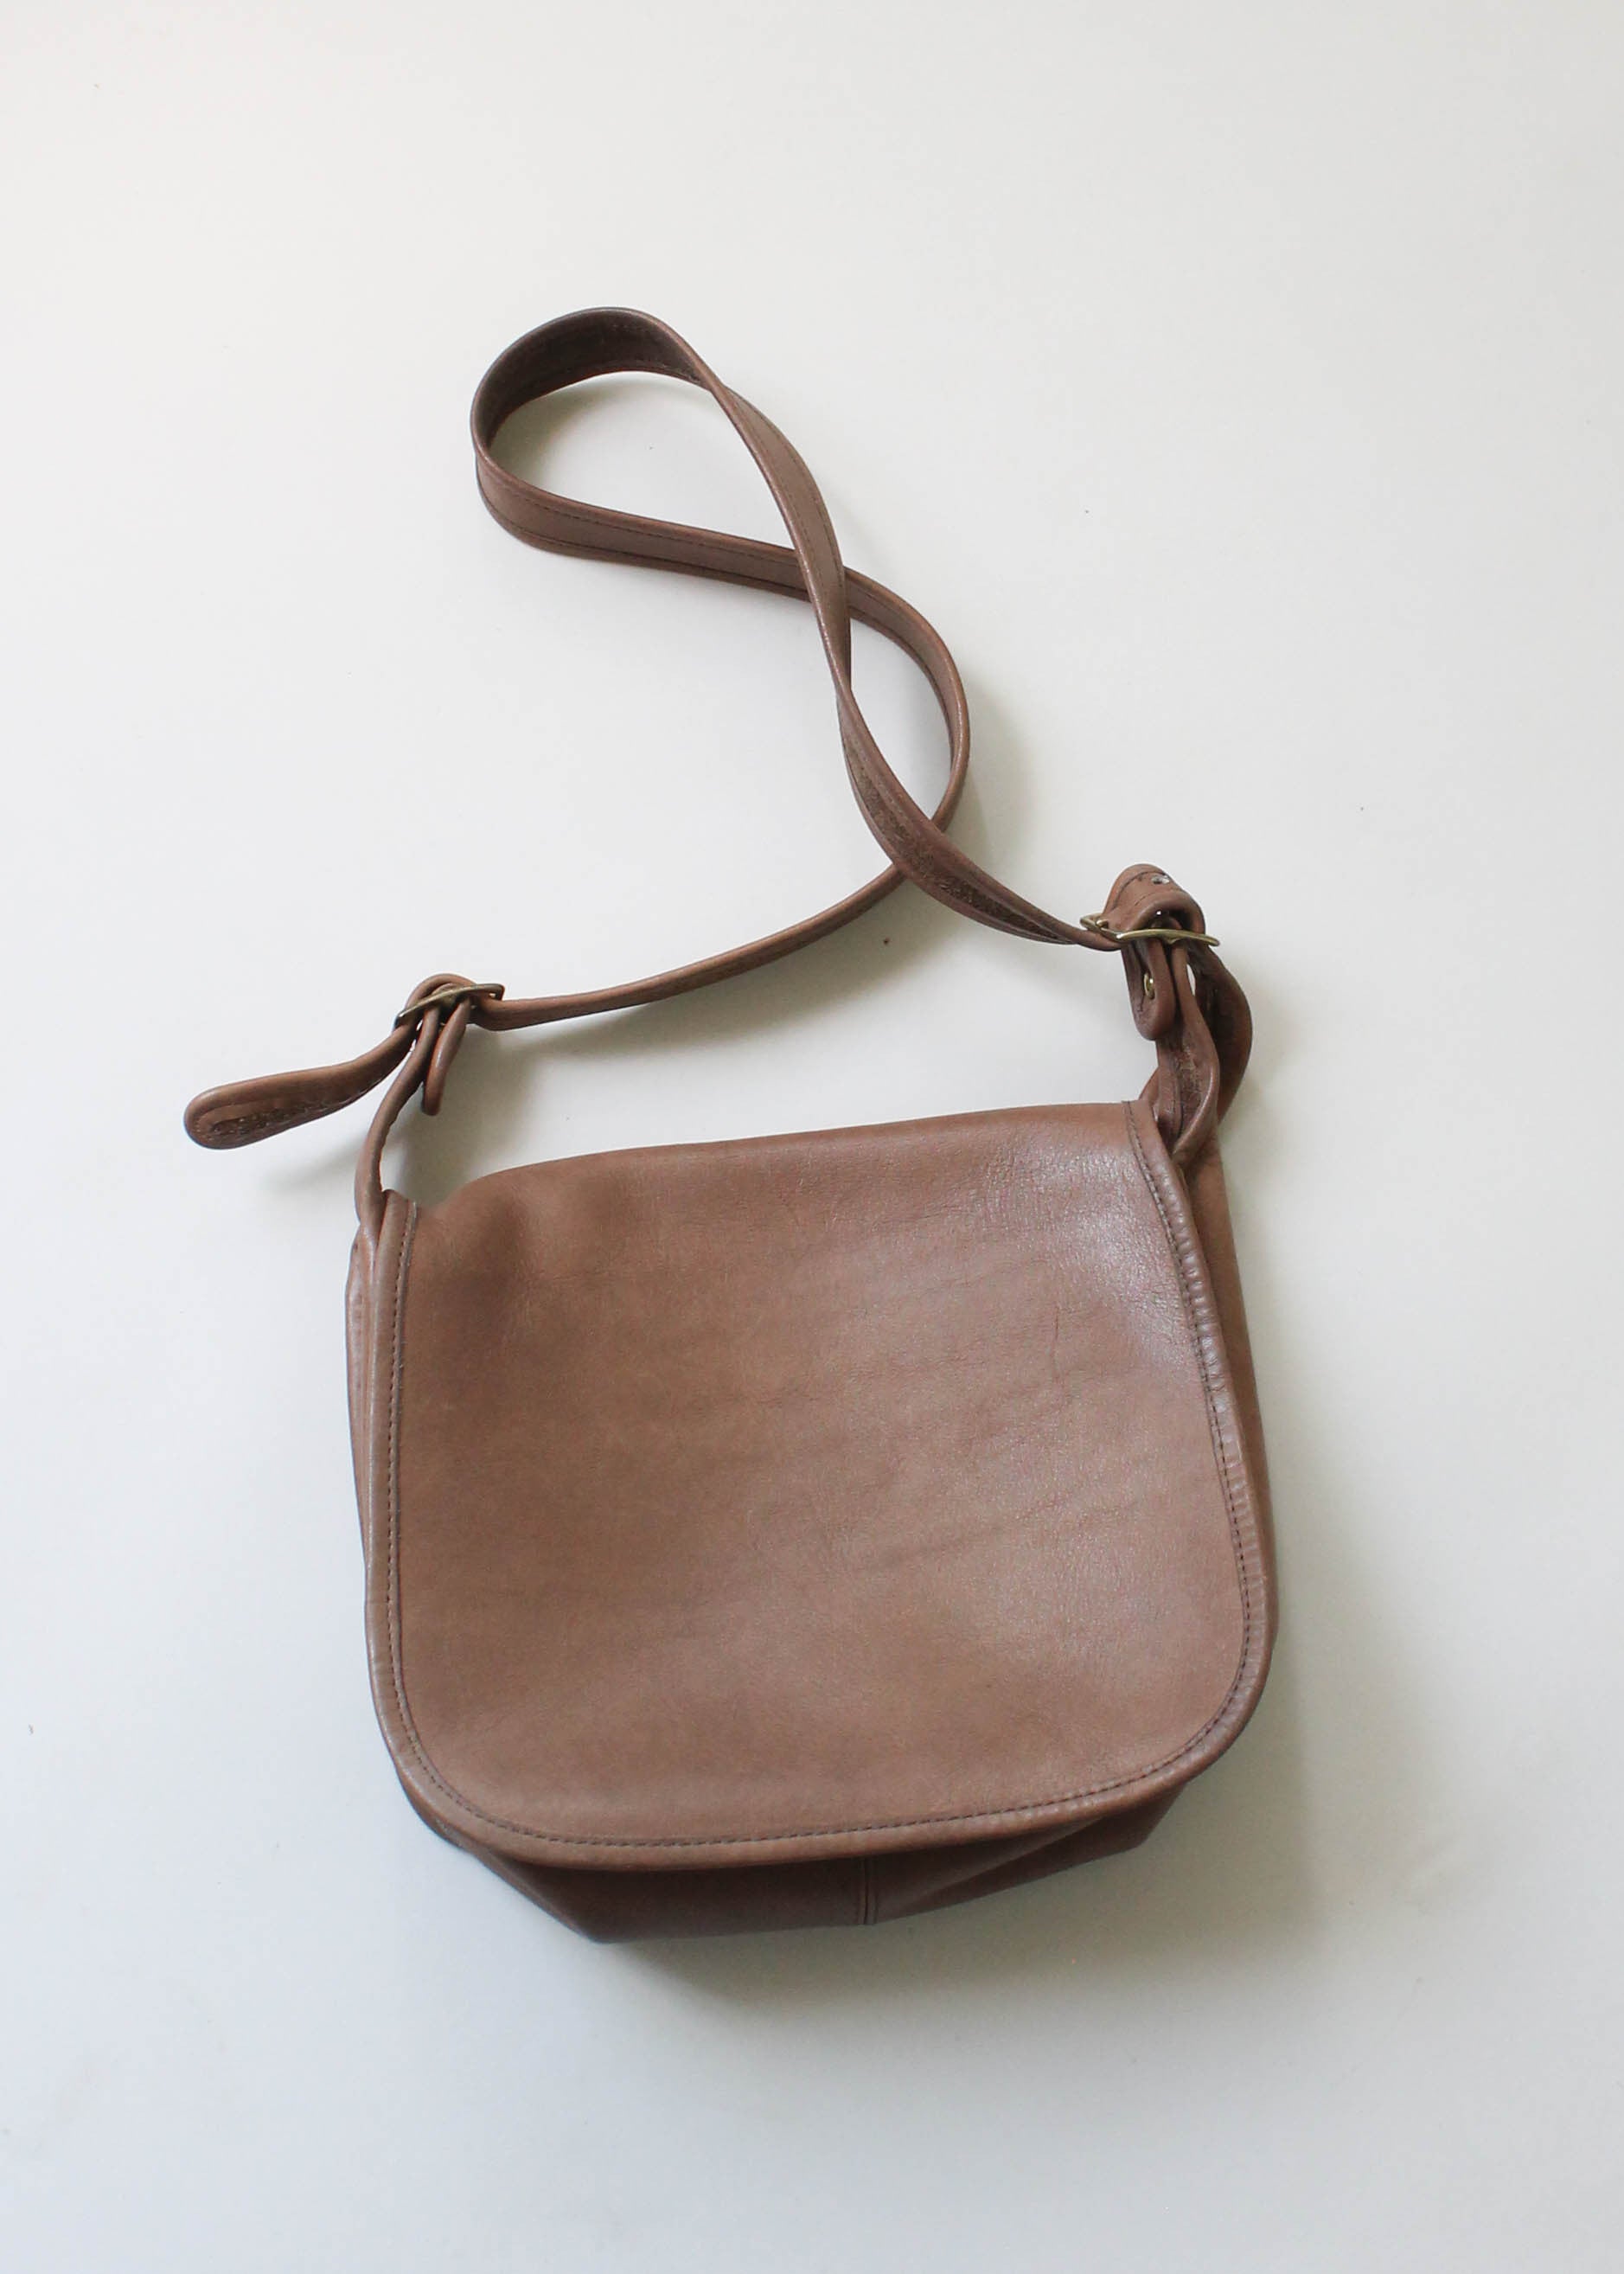 Purses From The 1970s | IQS Executive